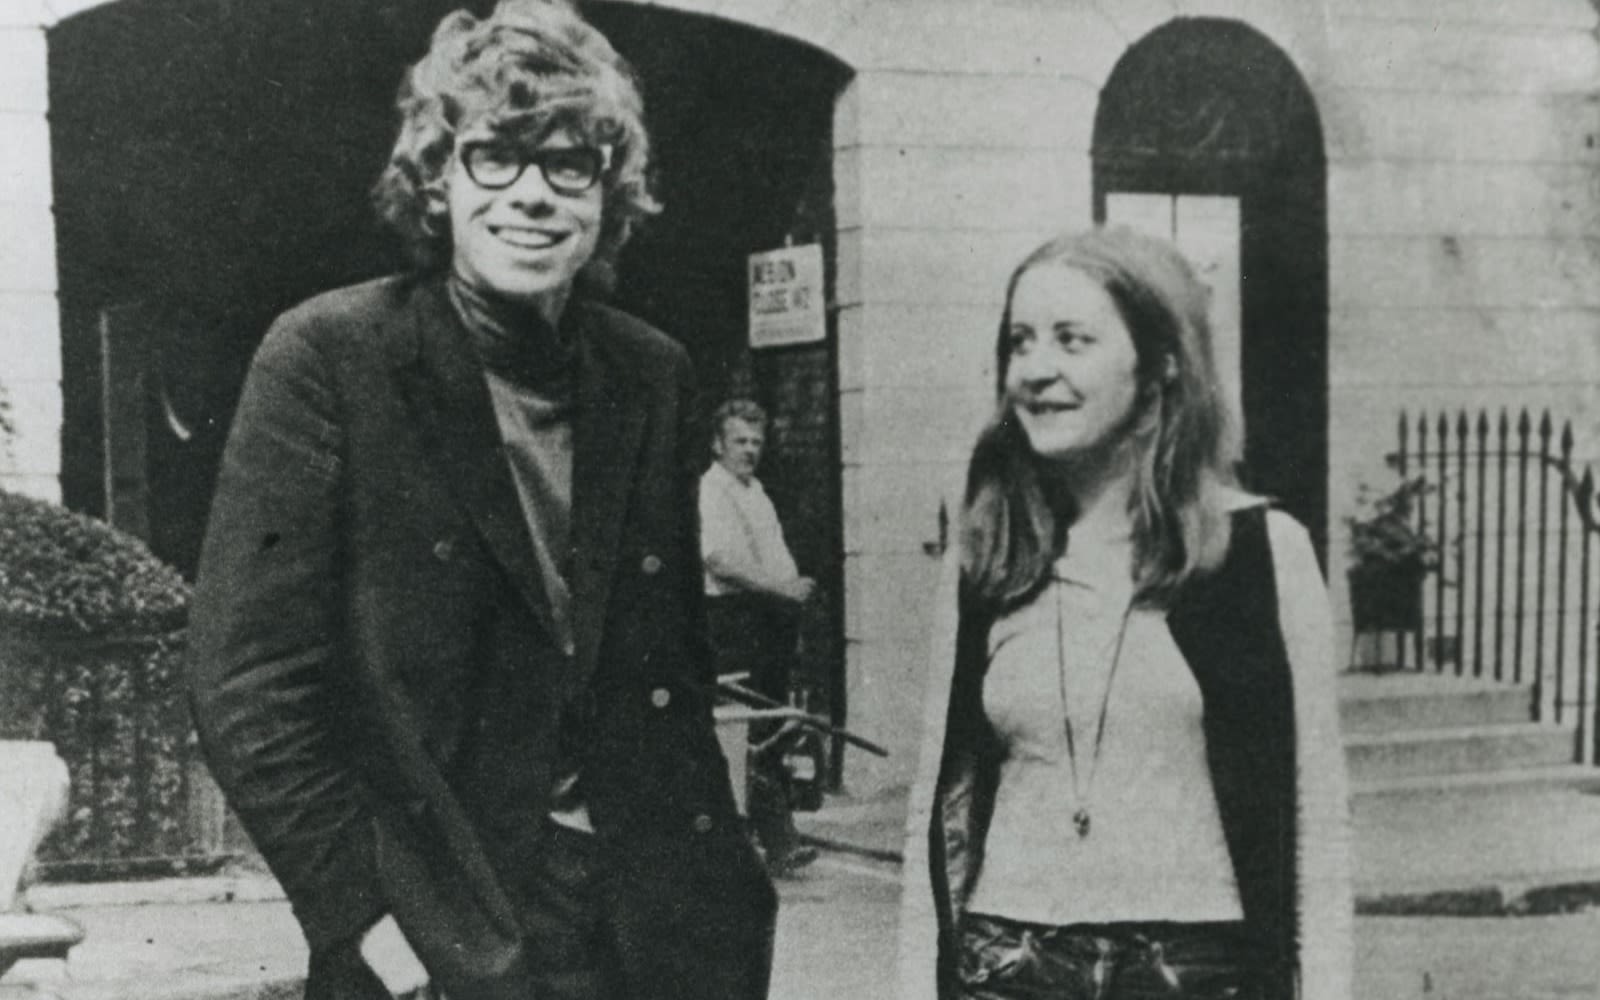 Black and white image of Richard Branson as a student standing next to a female student